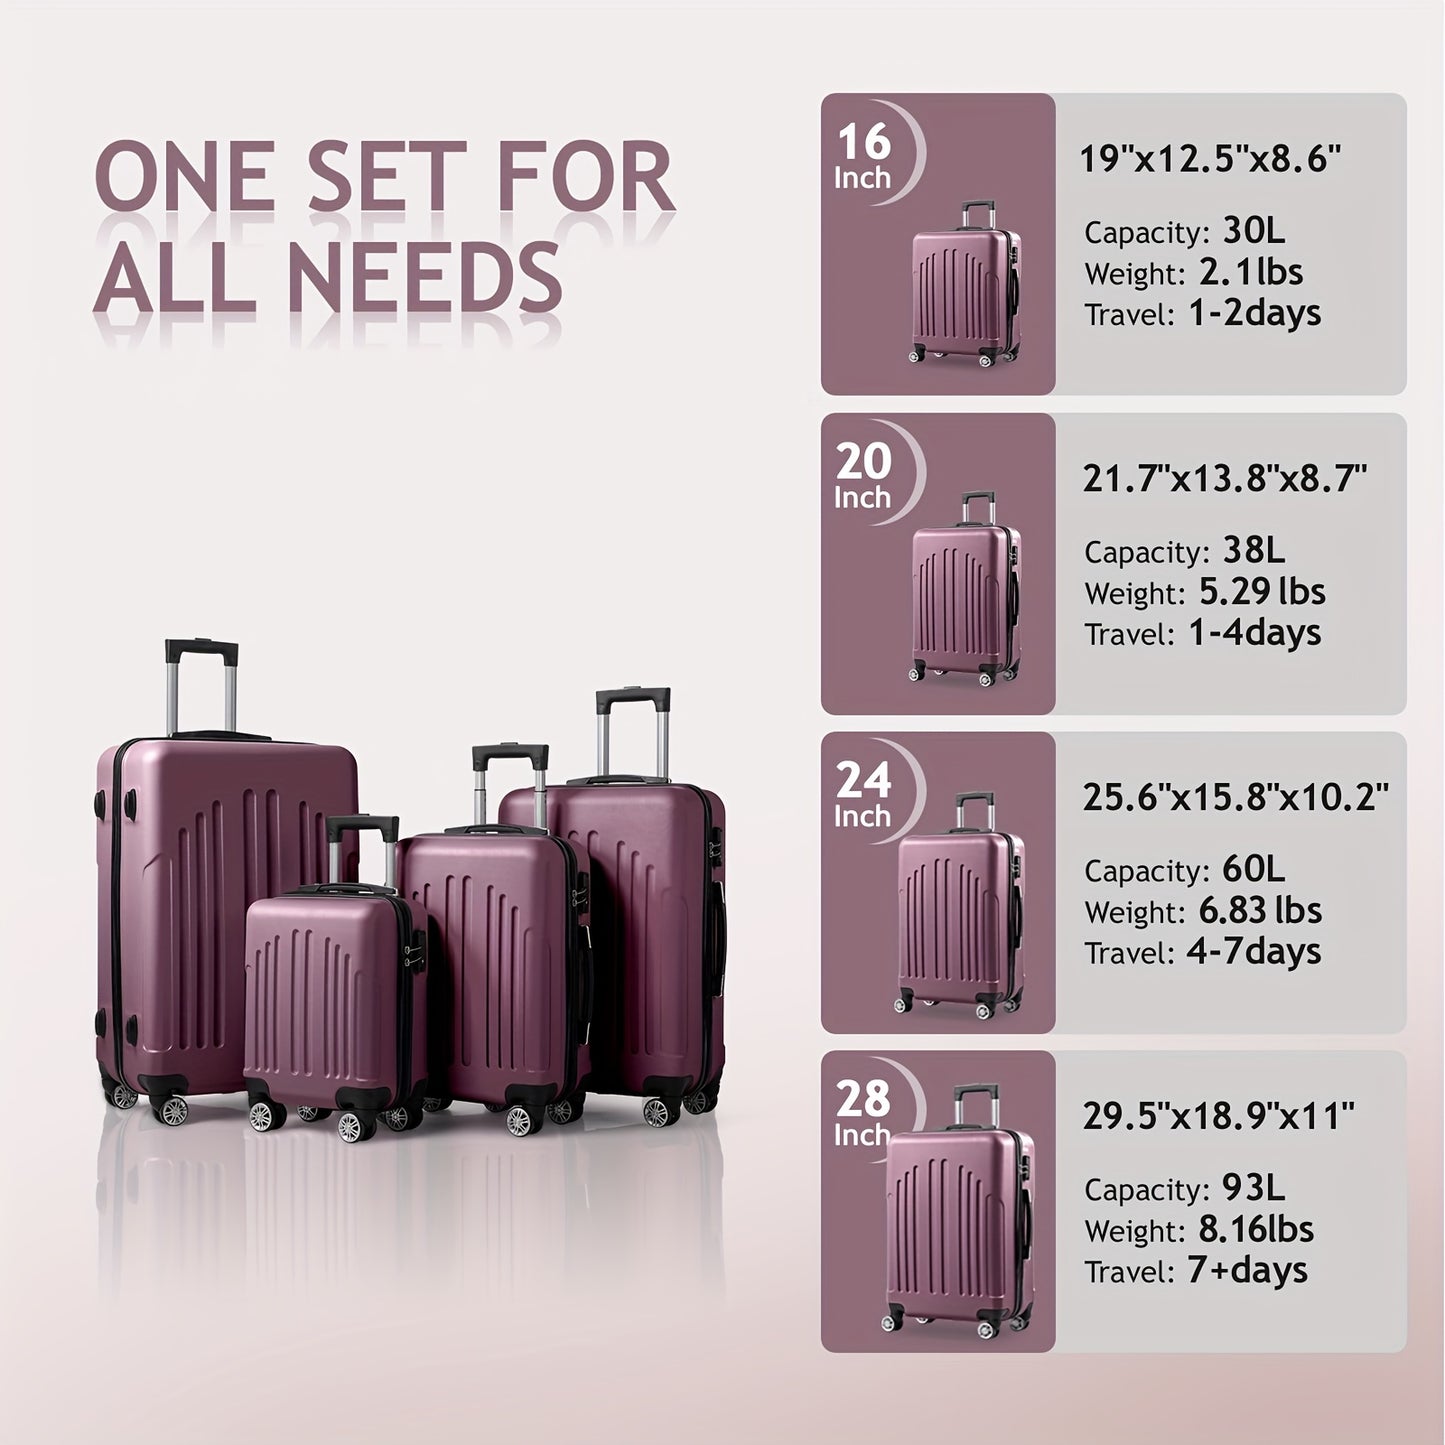 4-Piece Luxury Luggage Set - Durable ABS Hard Shell, Smooth Double Wheels, TSA-Approved Lock